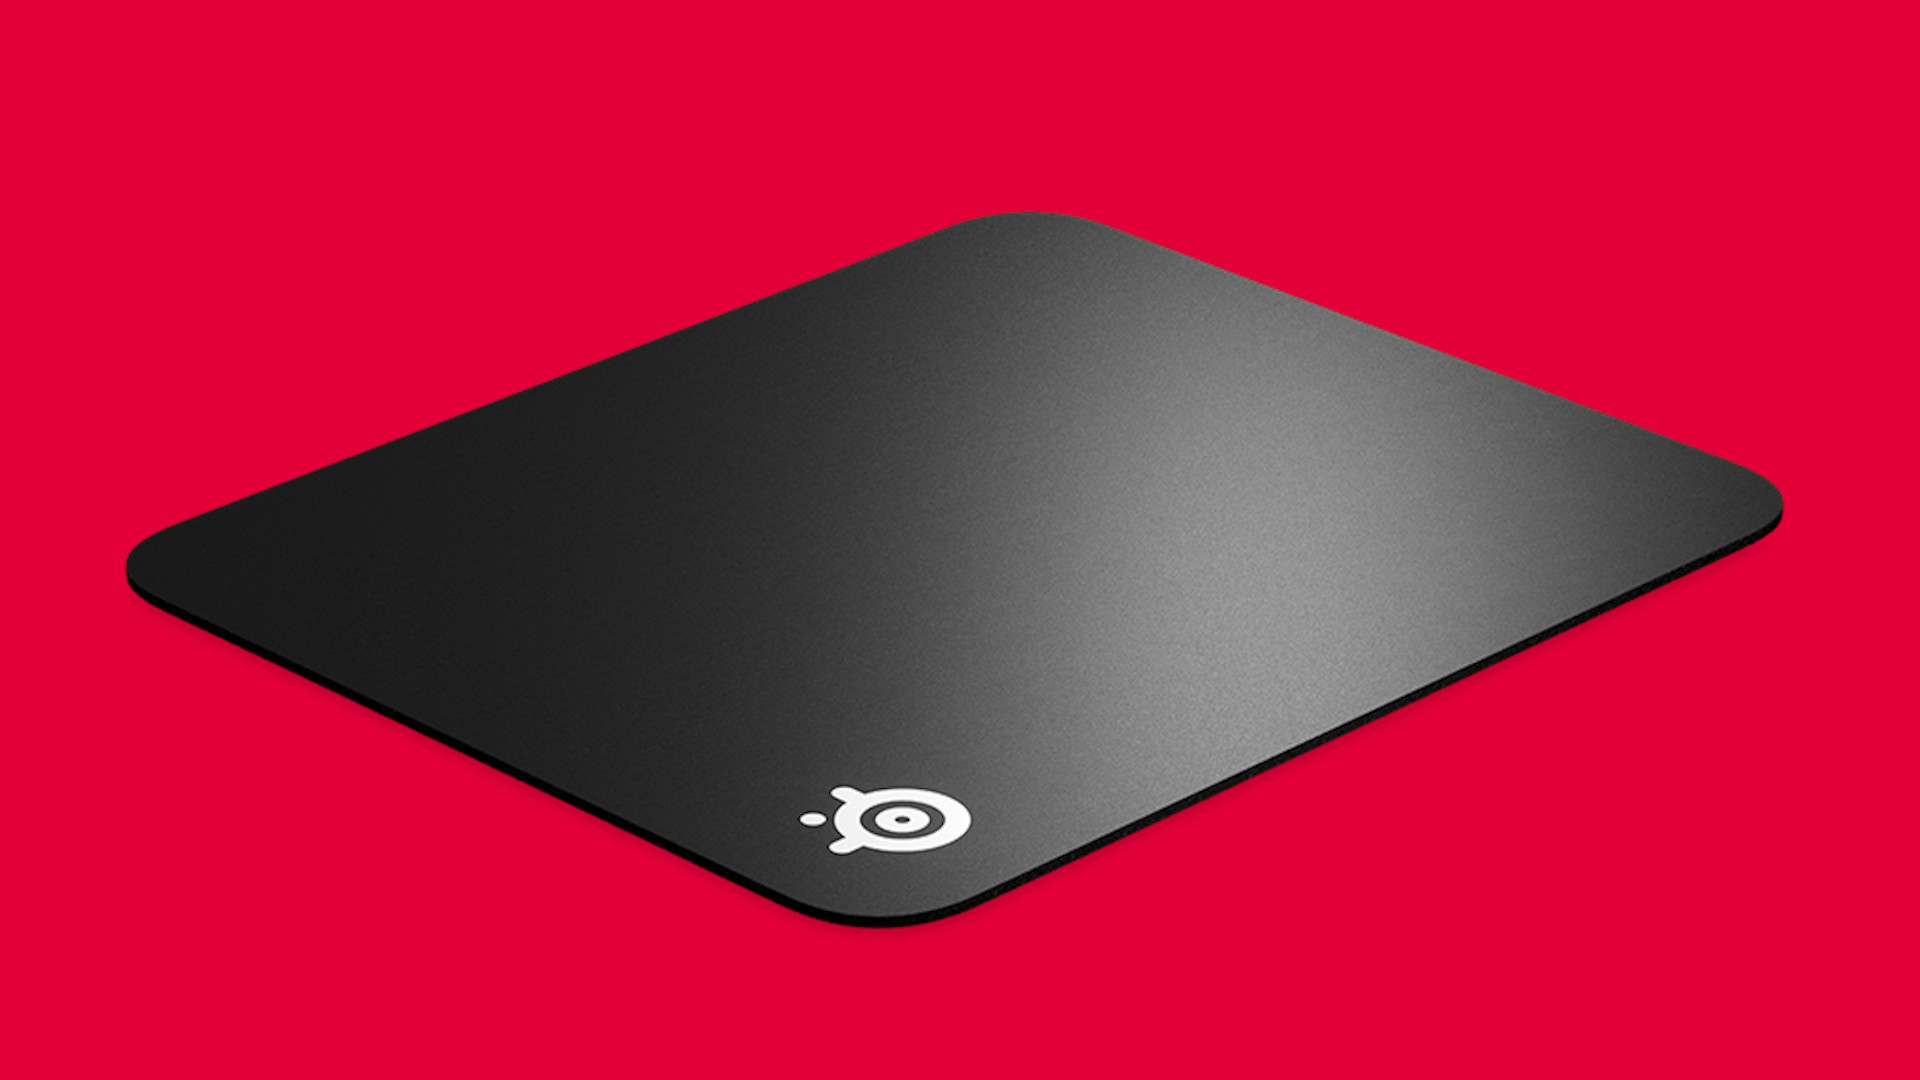 Hard vs soft mouse mat gaming: A hard Steelseries mouse mat on a red background